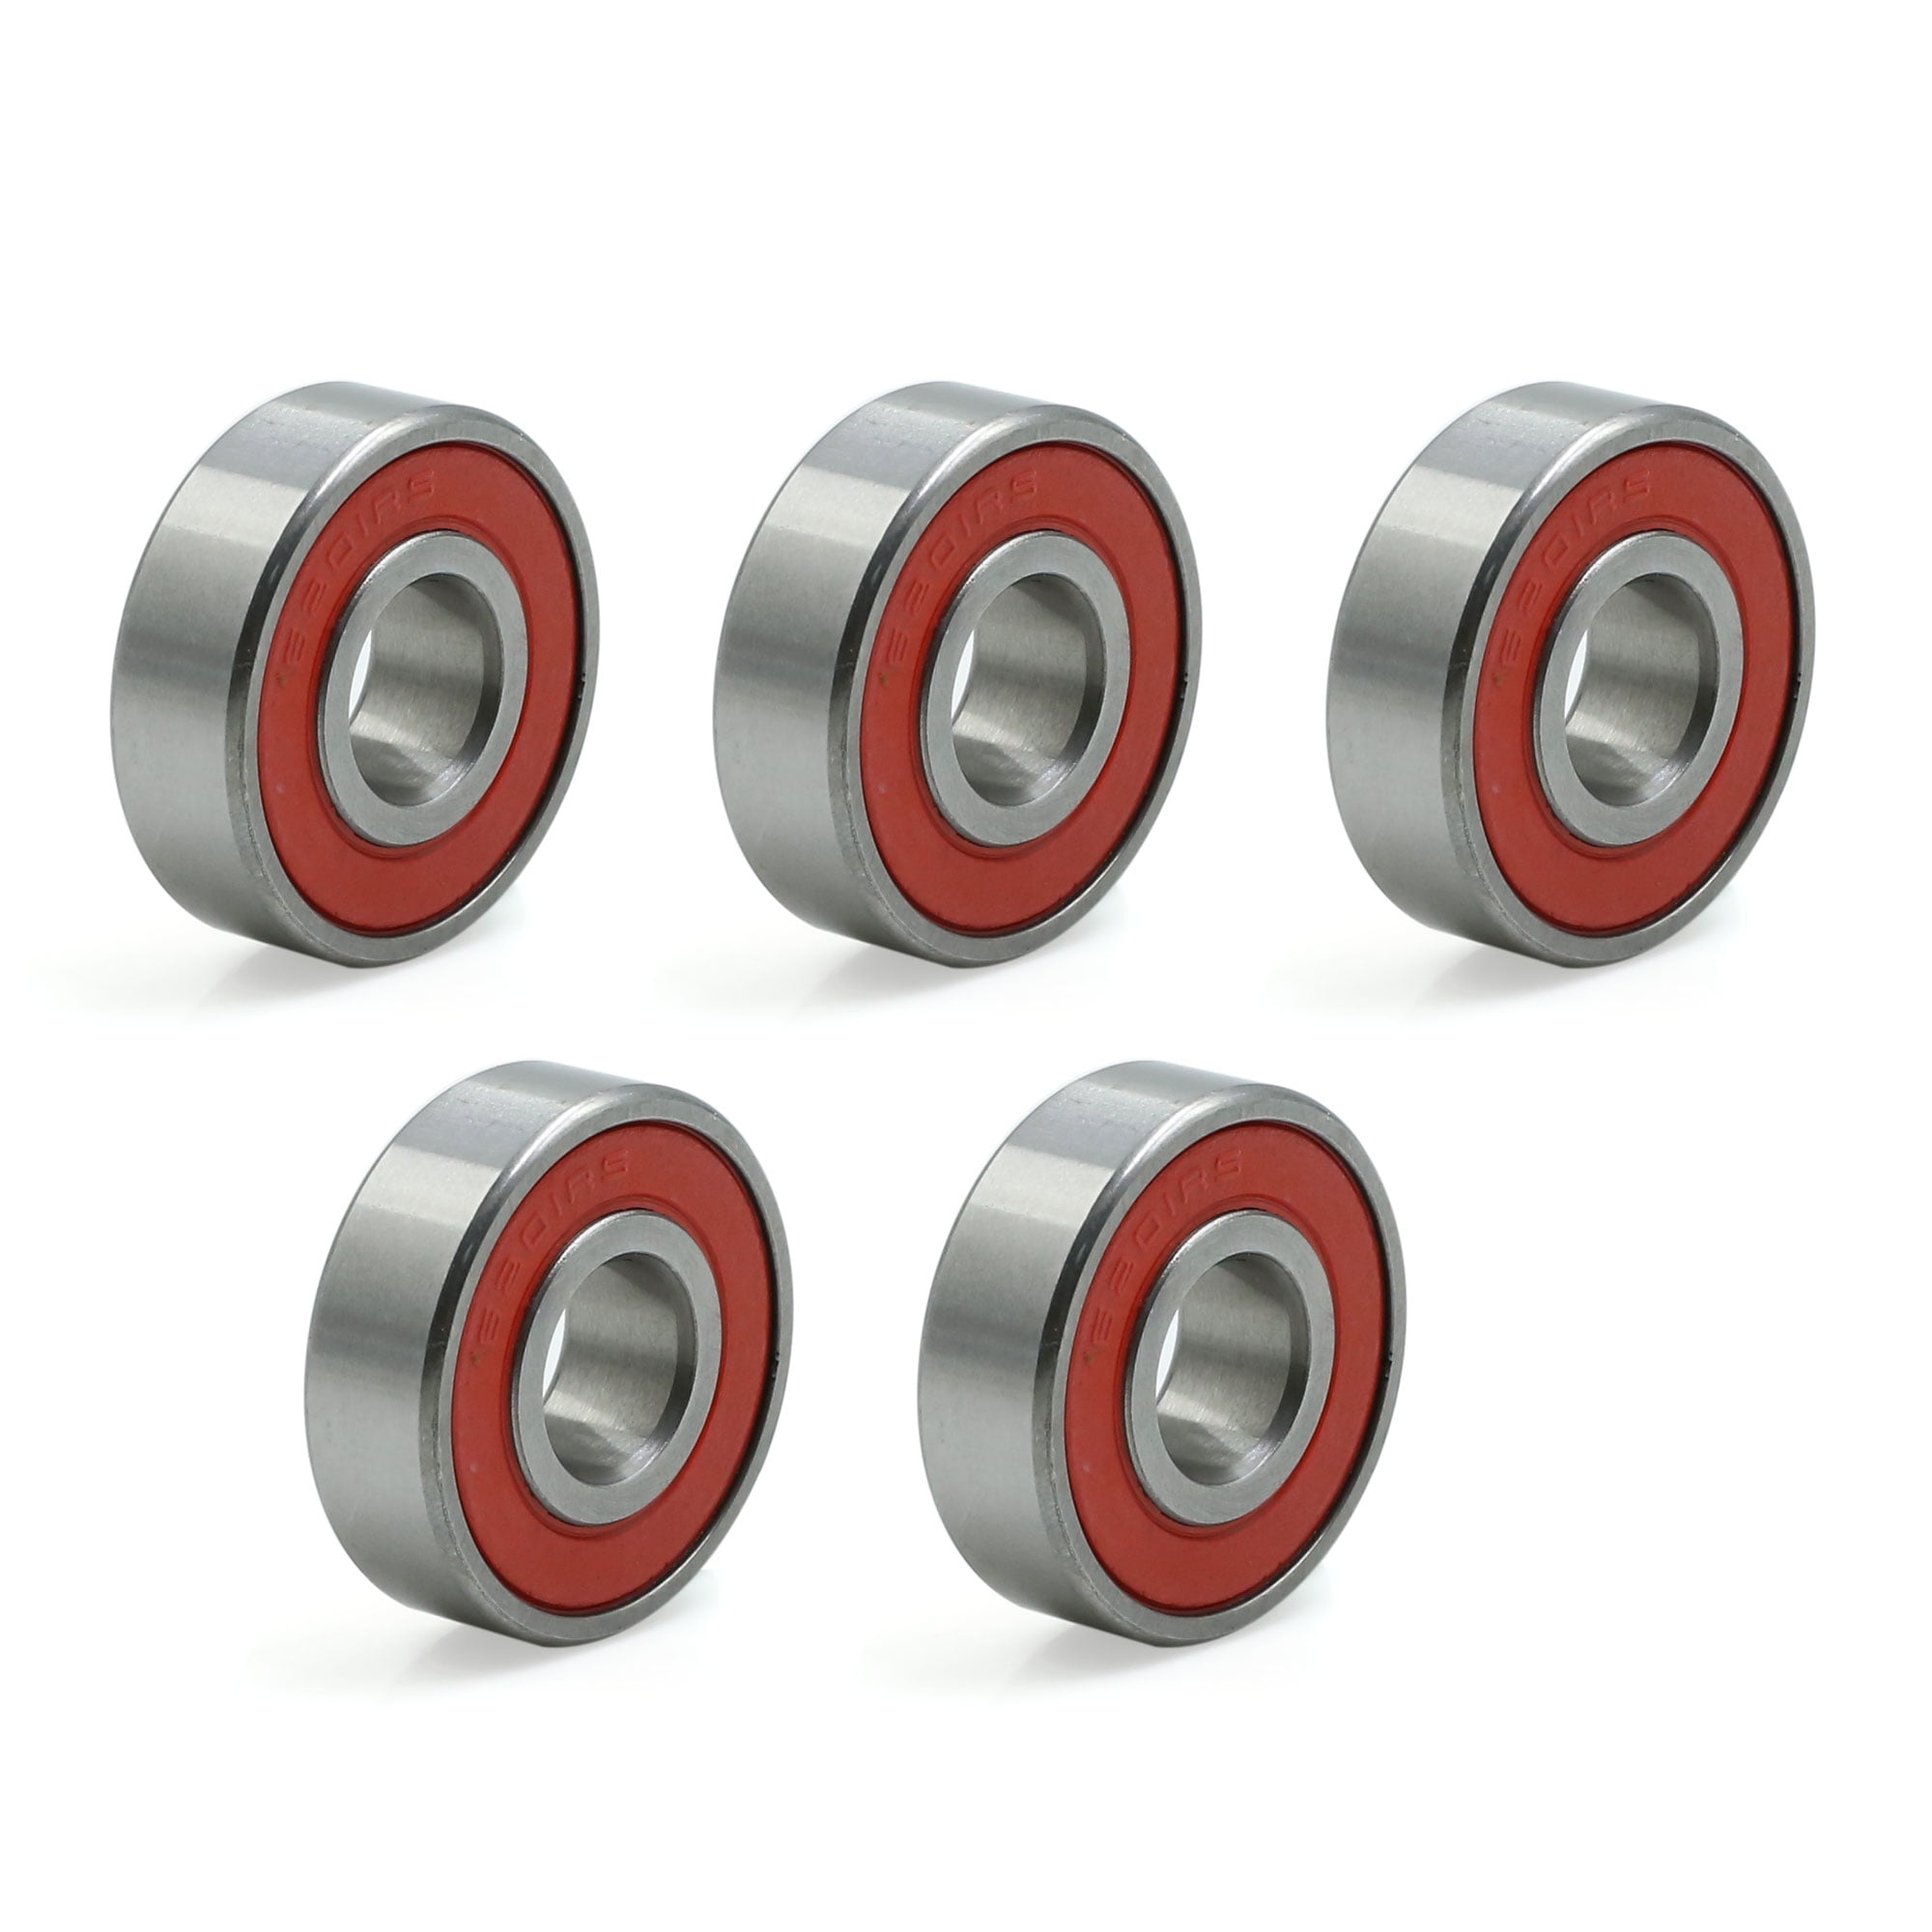 6201 2RS 12mm x 32mm x 10mm Shielded Deep Groove Ball Bearing 6201RS 